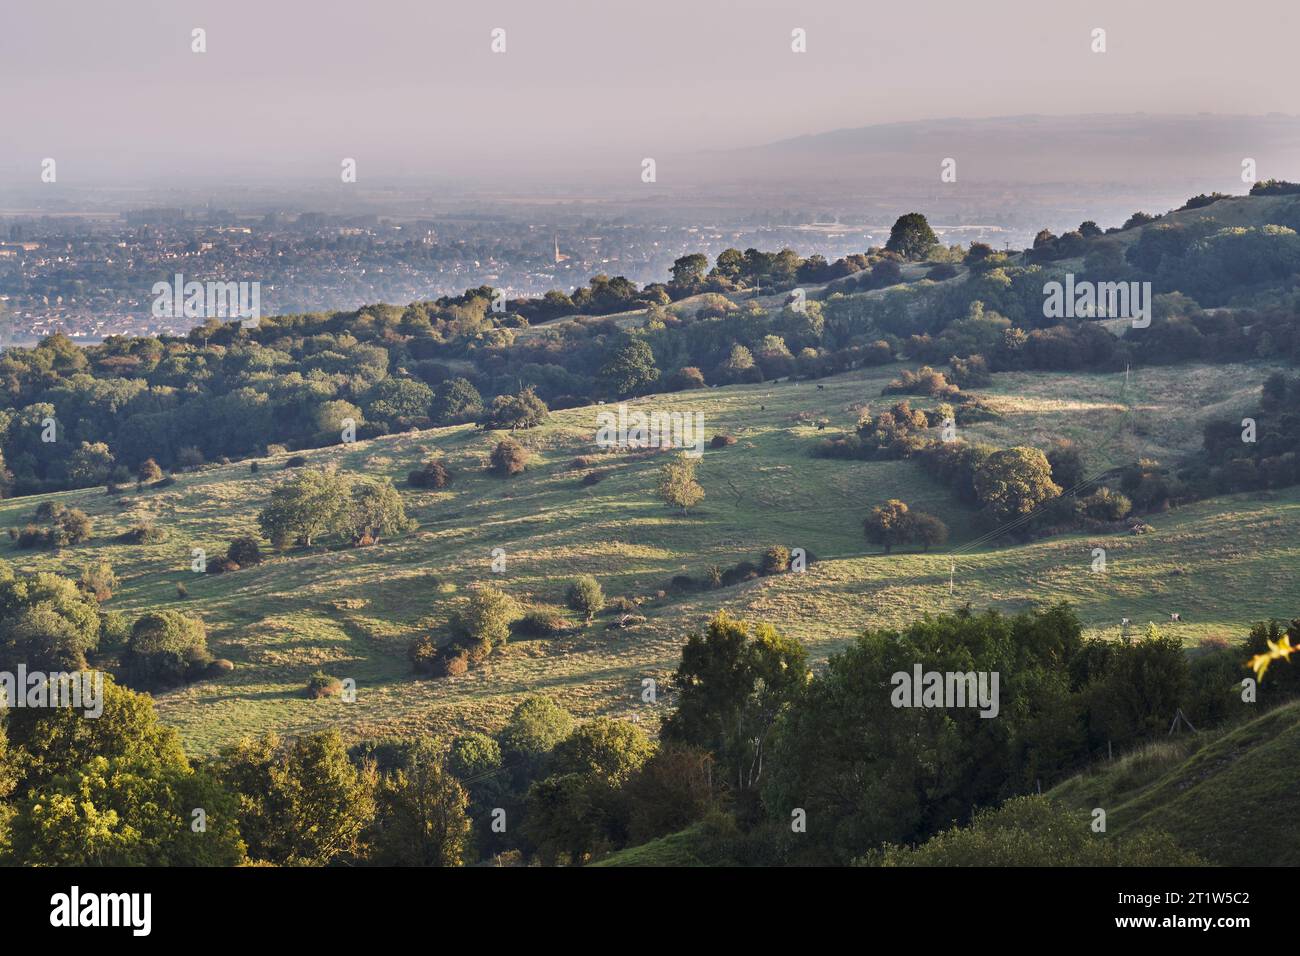 View of trees, fields and scrub looking towards Cheltenham on a misty morning Stock Photo